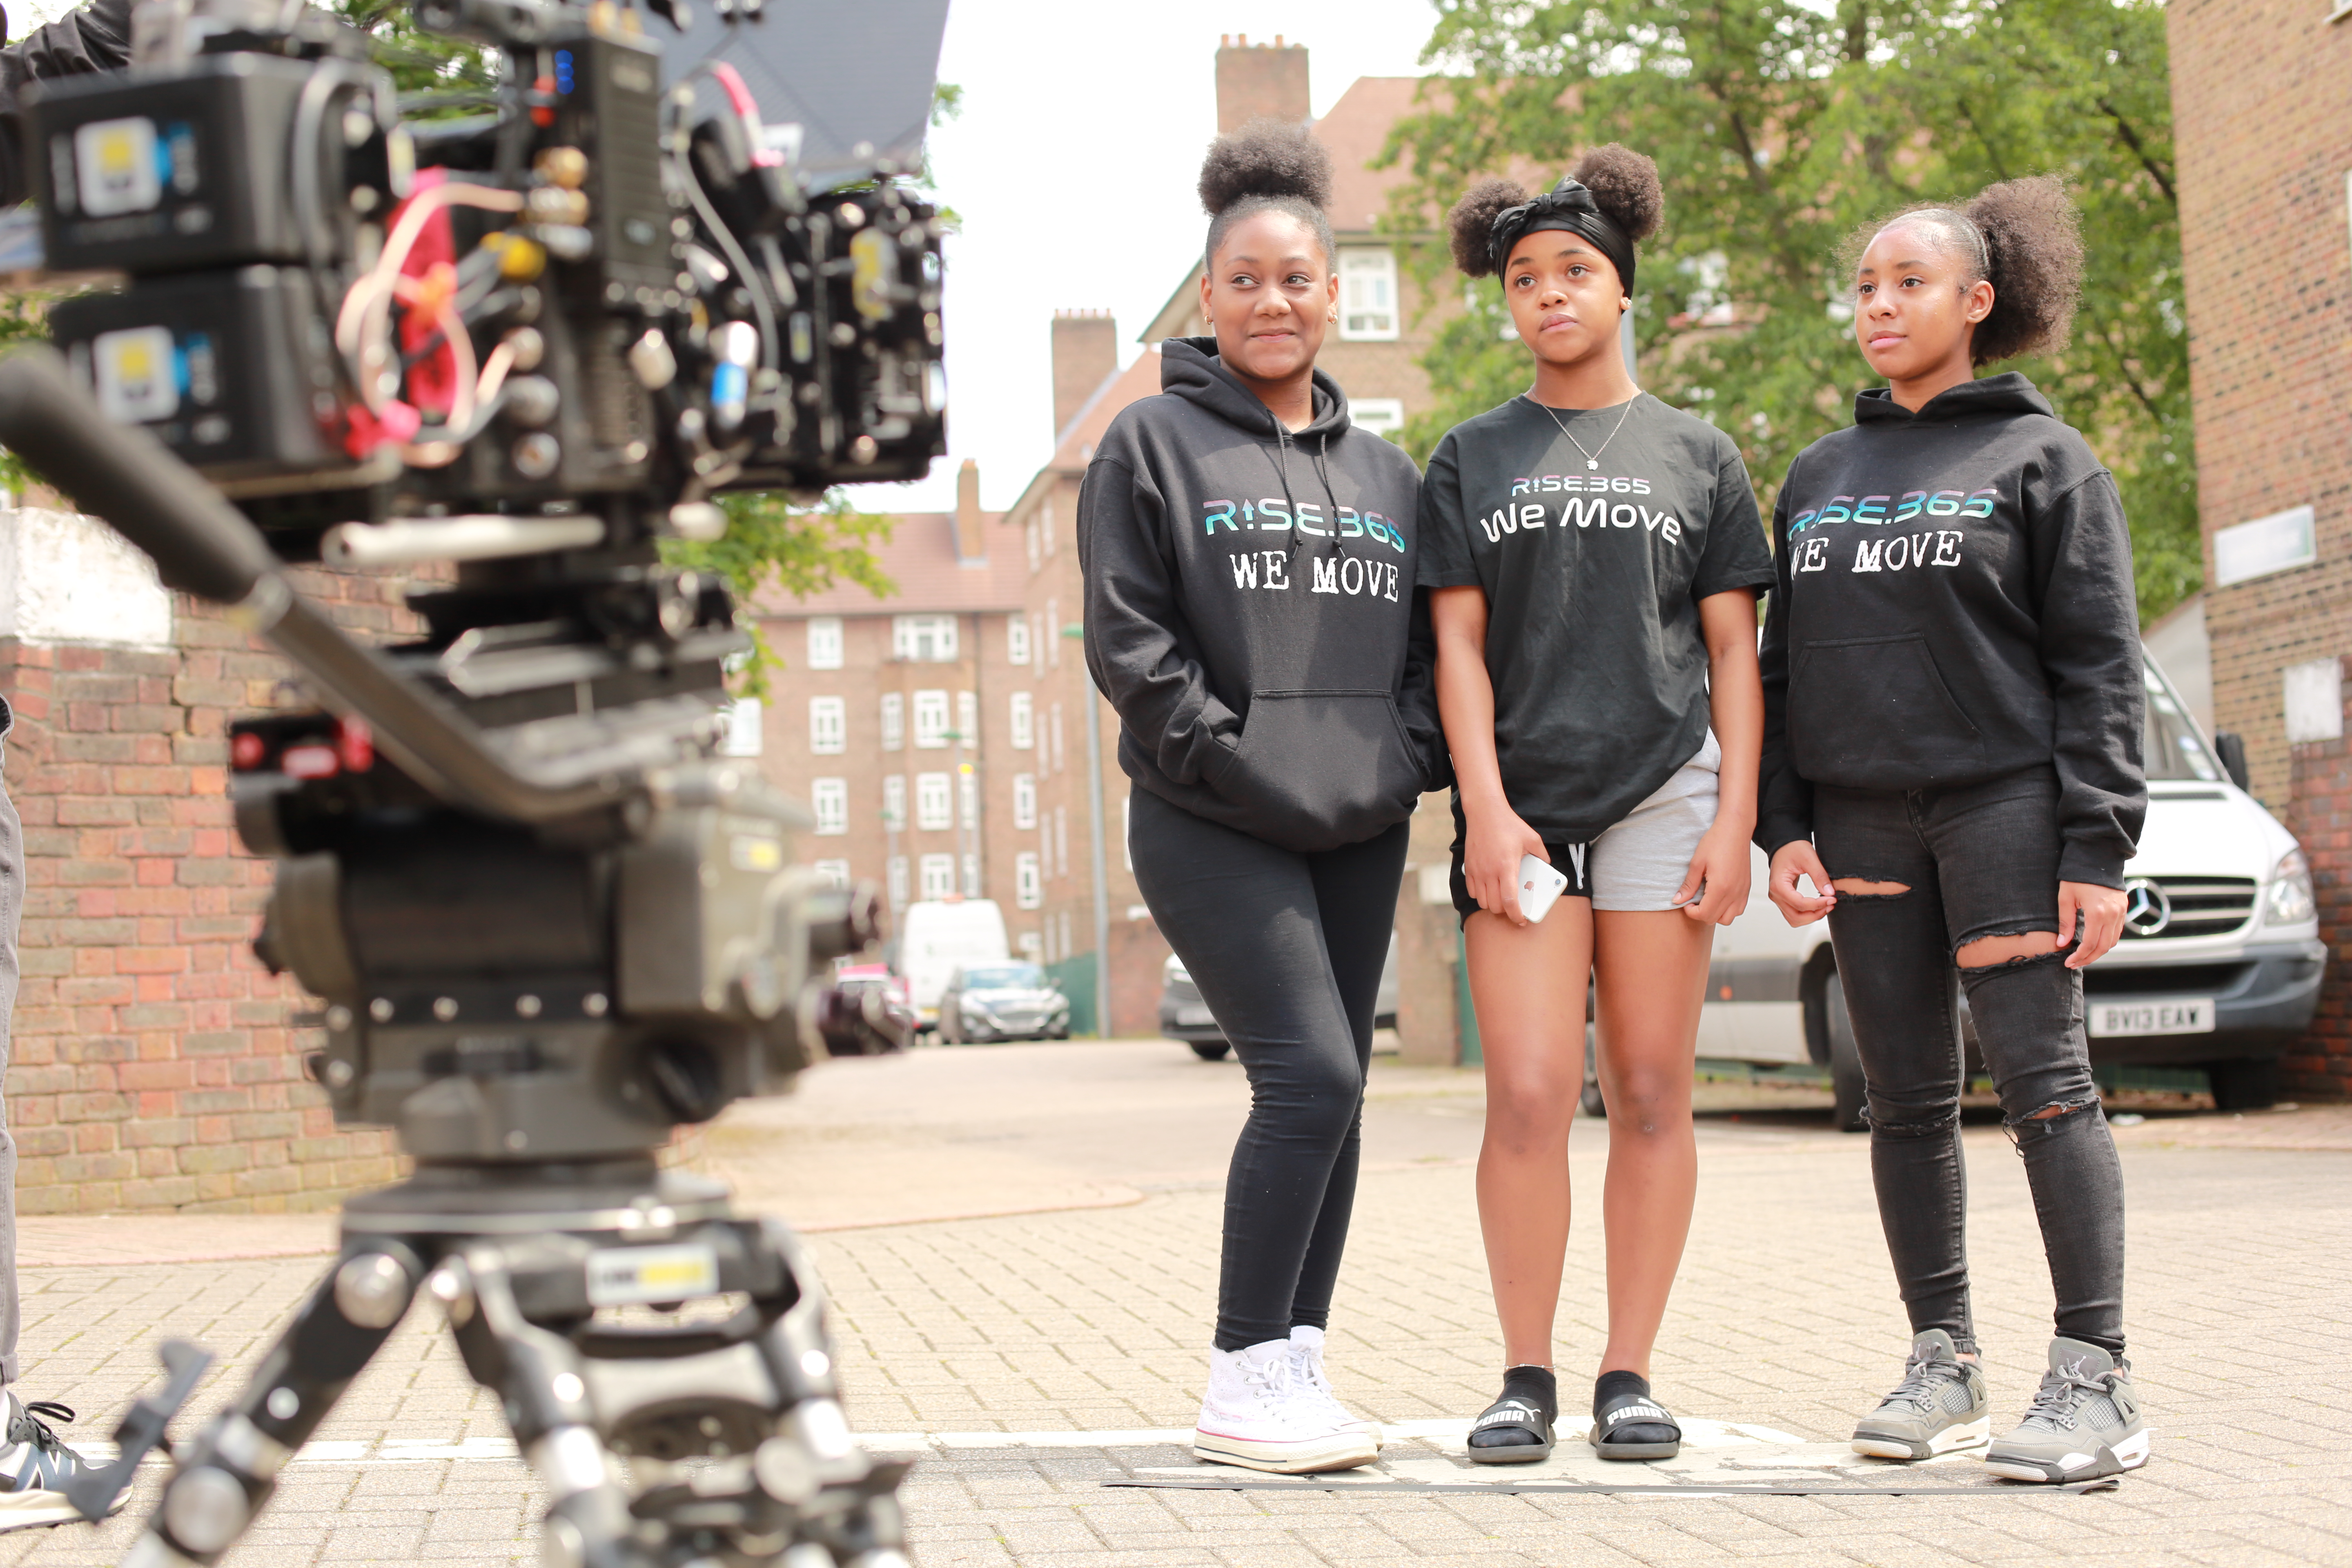 On the left is a cfilm camera poitned to three young women standing on the right. These three young women are wearing RISE 365 hoodies and t-shirts, have their afro hair tied up. They are standing in a car park on a London estate.